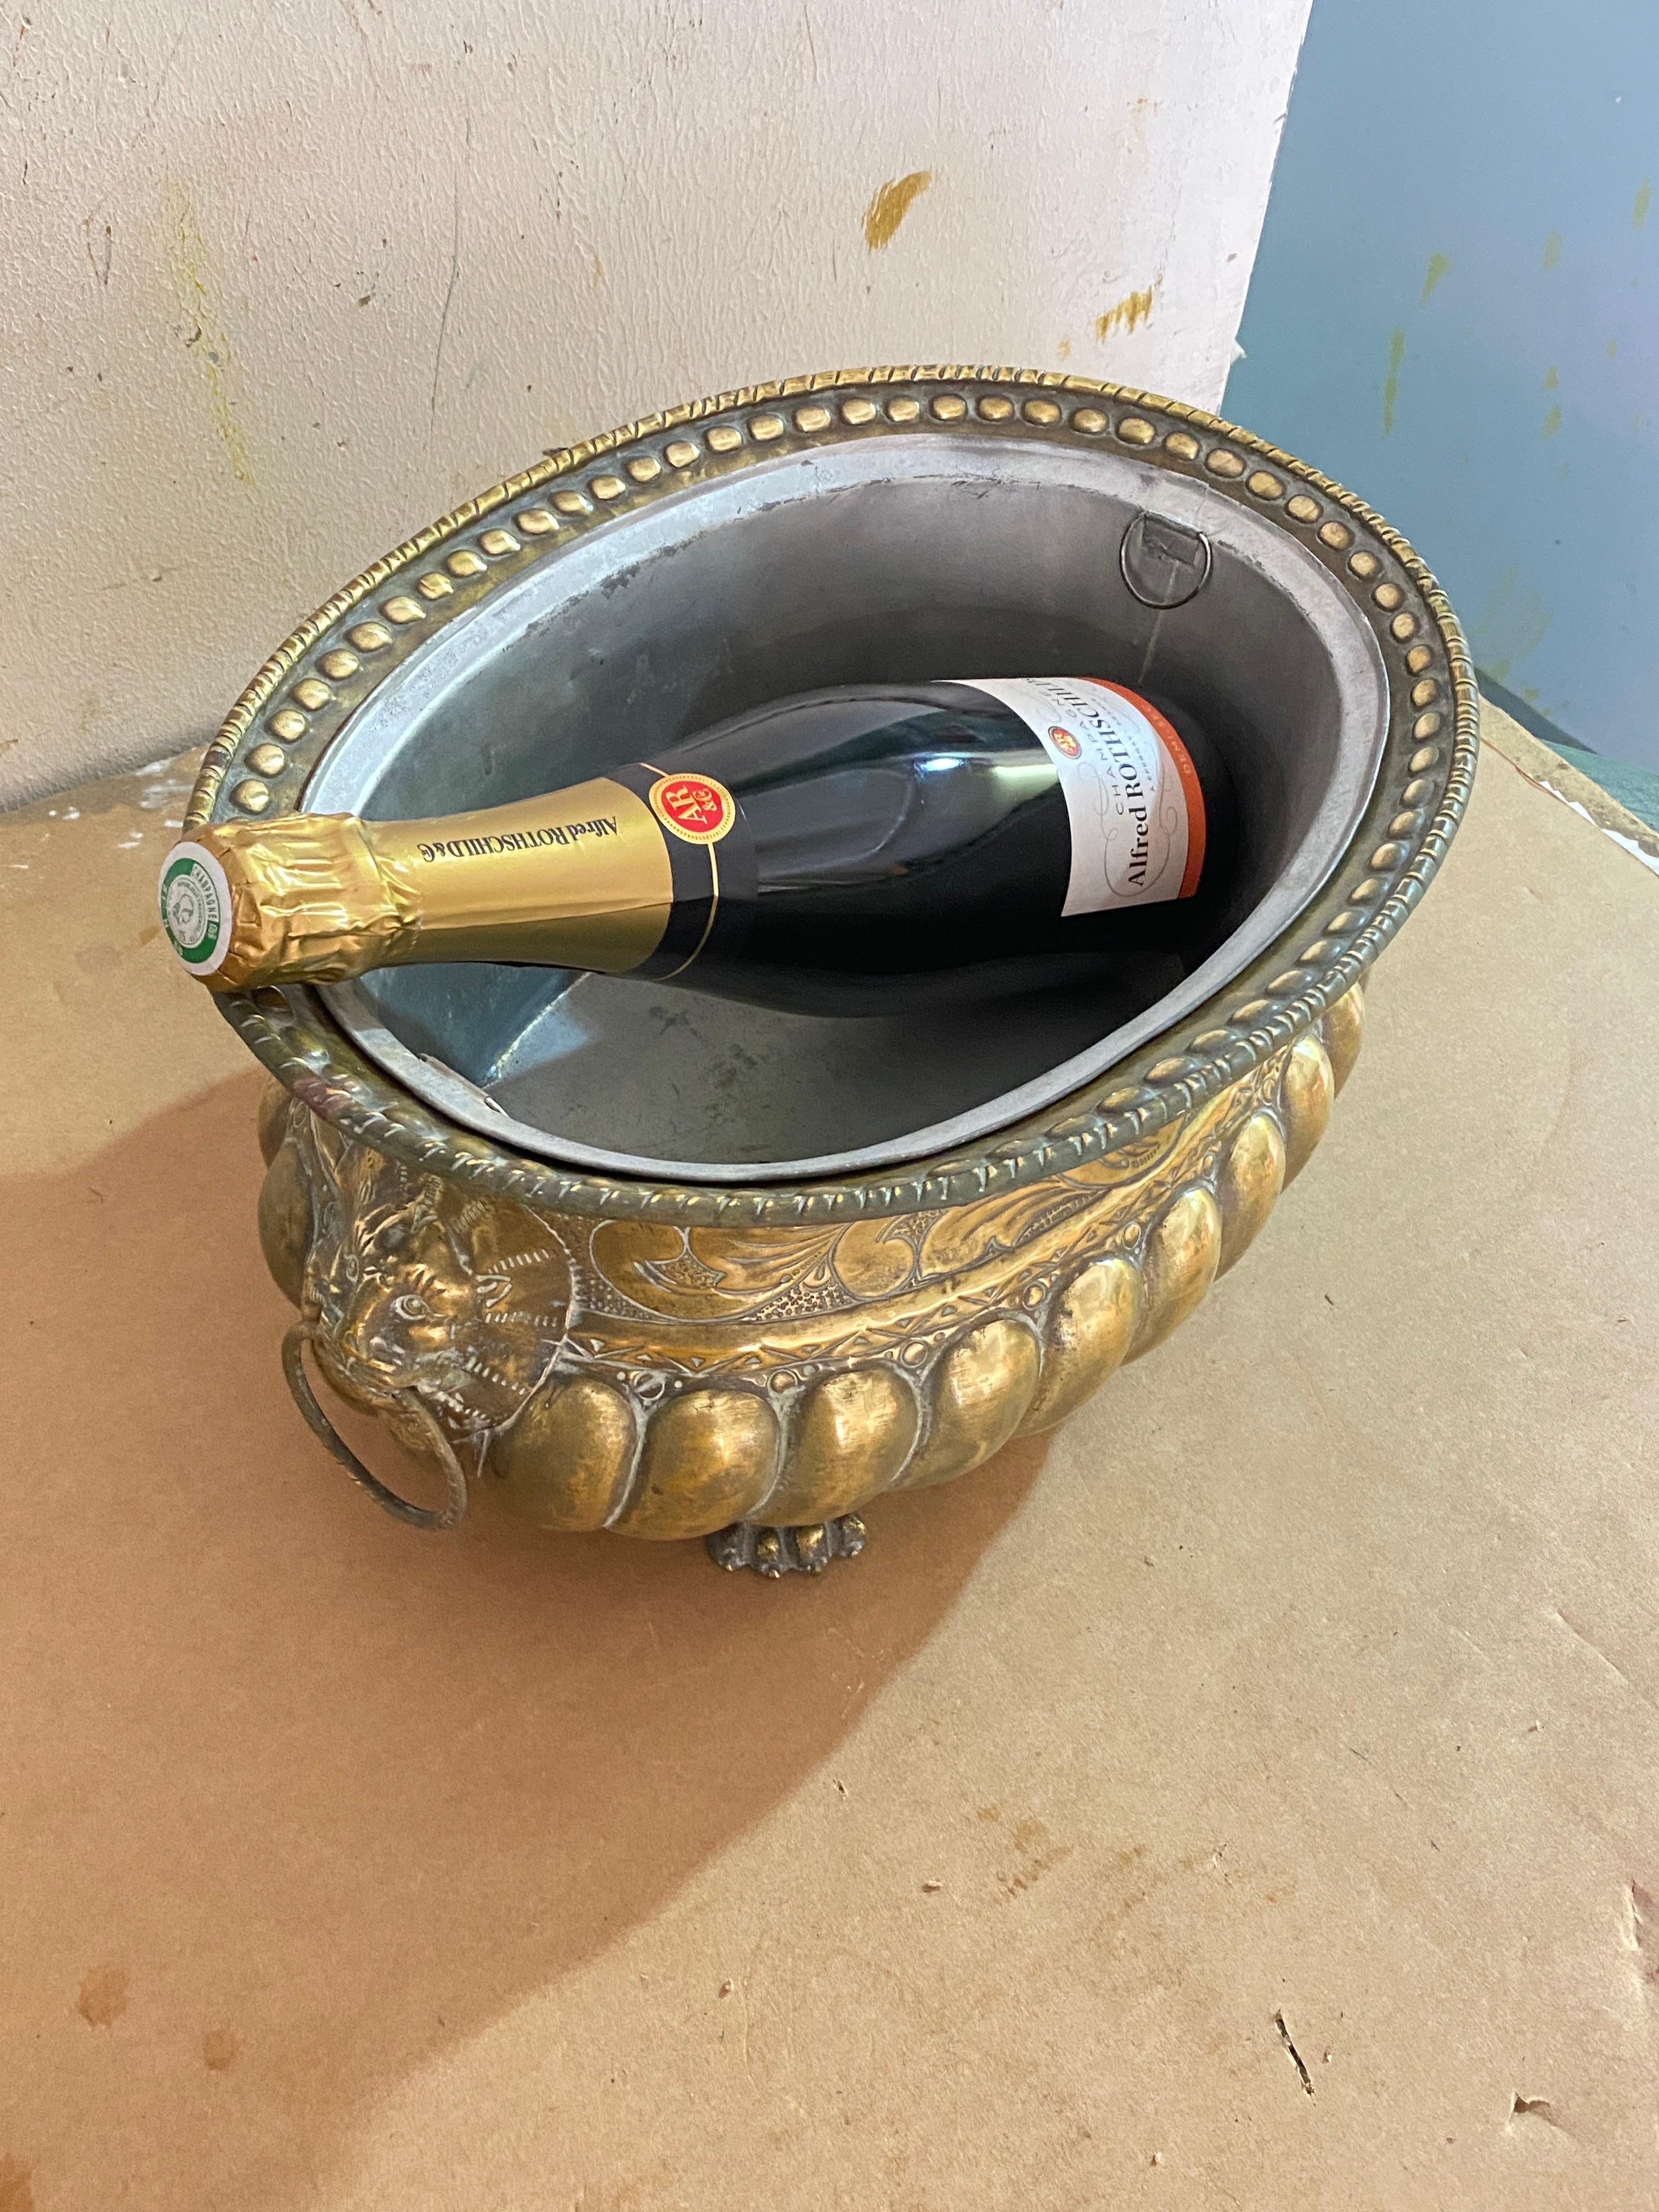 This planter is made of brass, made in France in the 19th century. It has ornaments in the shape of a lion, rings, and other figures. Its color is gold, and it rests on four lion paws. The pewter tray makes it very easy to turn it into a champagne